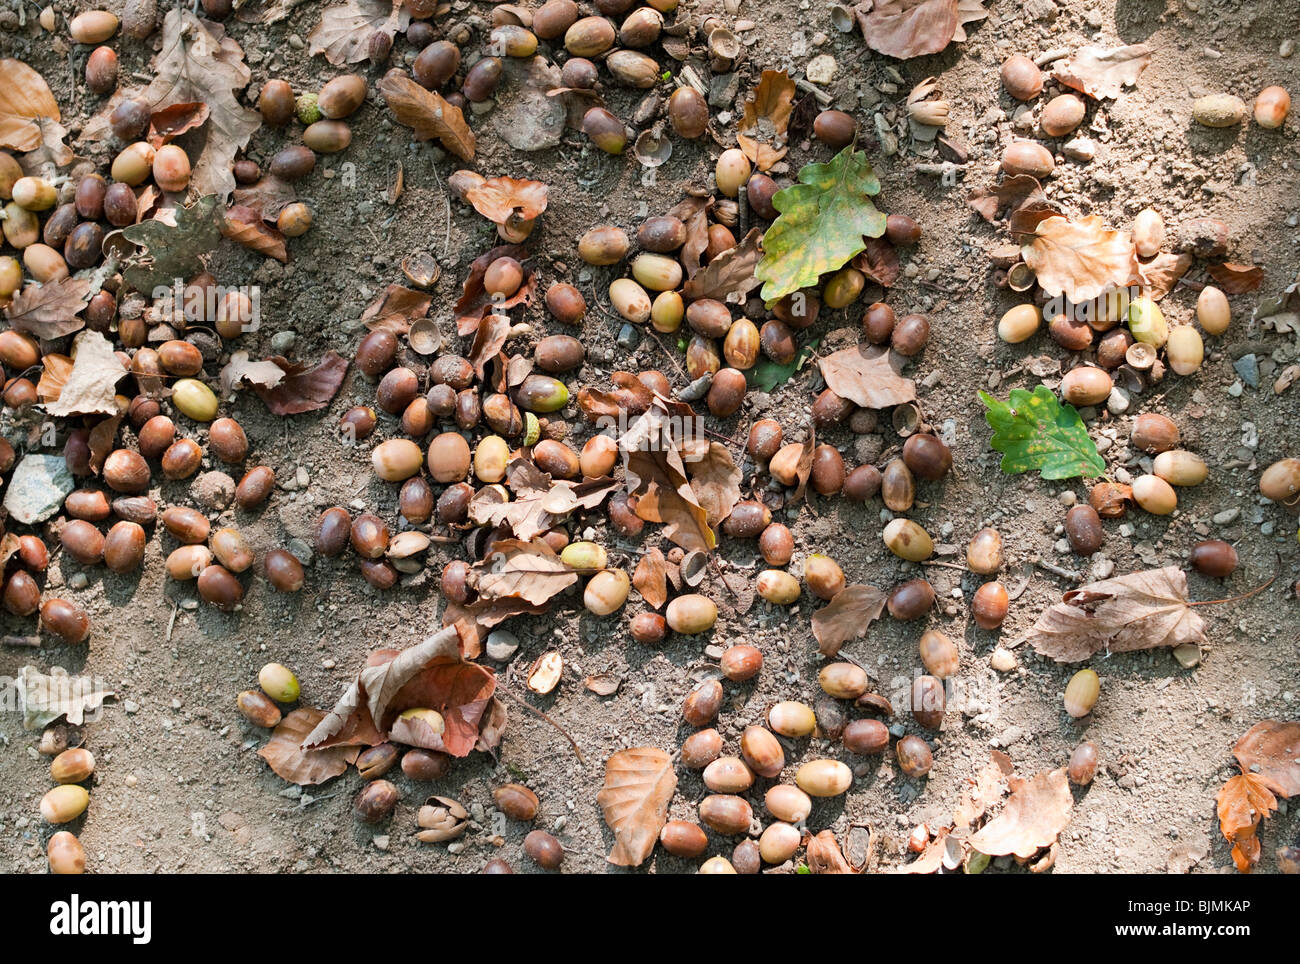 Fallen Hazelnuts (Corylus avellana) with leaves on the forest floor Stock Photo